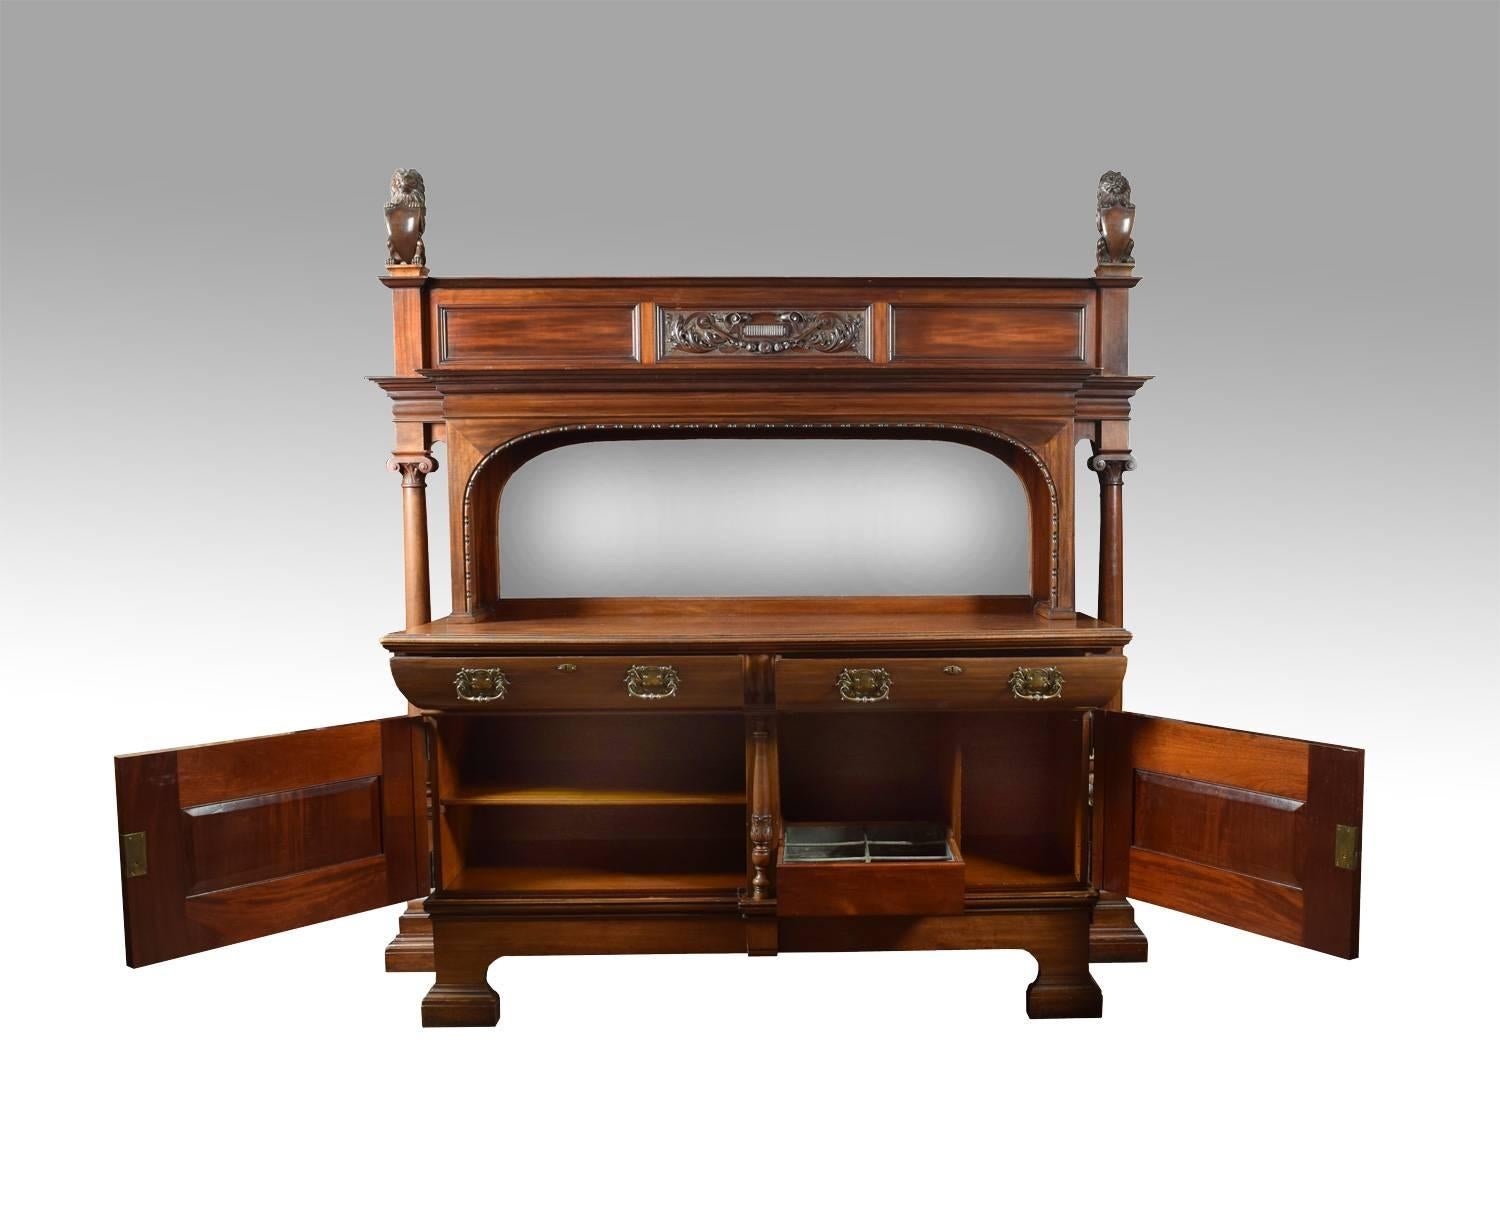 Very large walnut 19th century sideboard. The shaped beveled mirror back surmounted with lion finials and flared cornice supported on two circular turned columns with scrolling capitals.
The base section with two curved freeze draws with brass